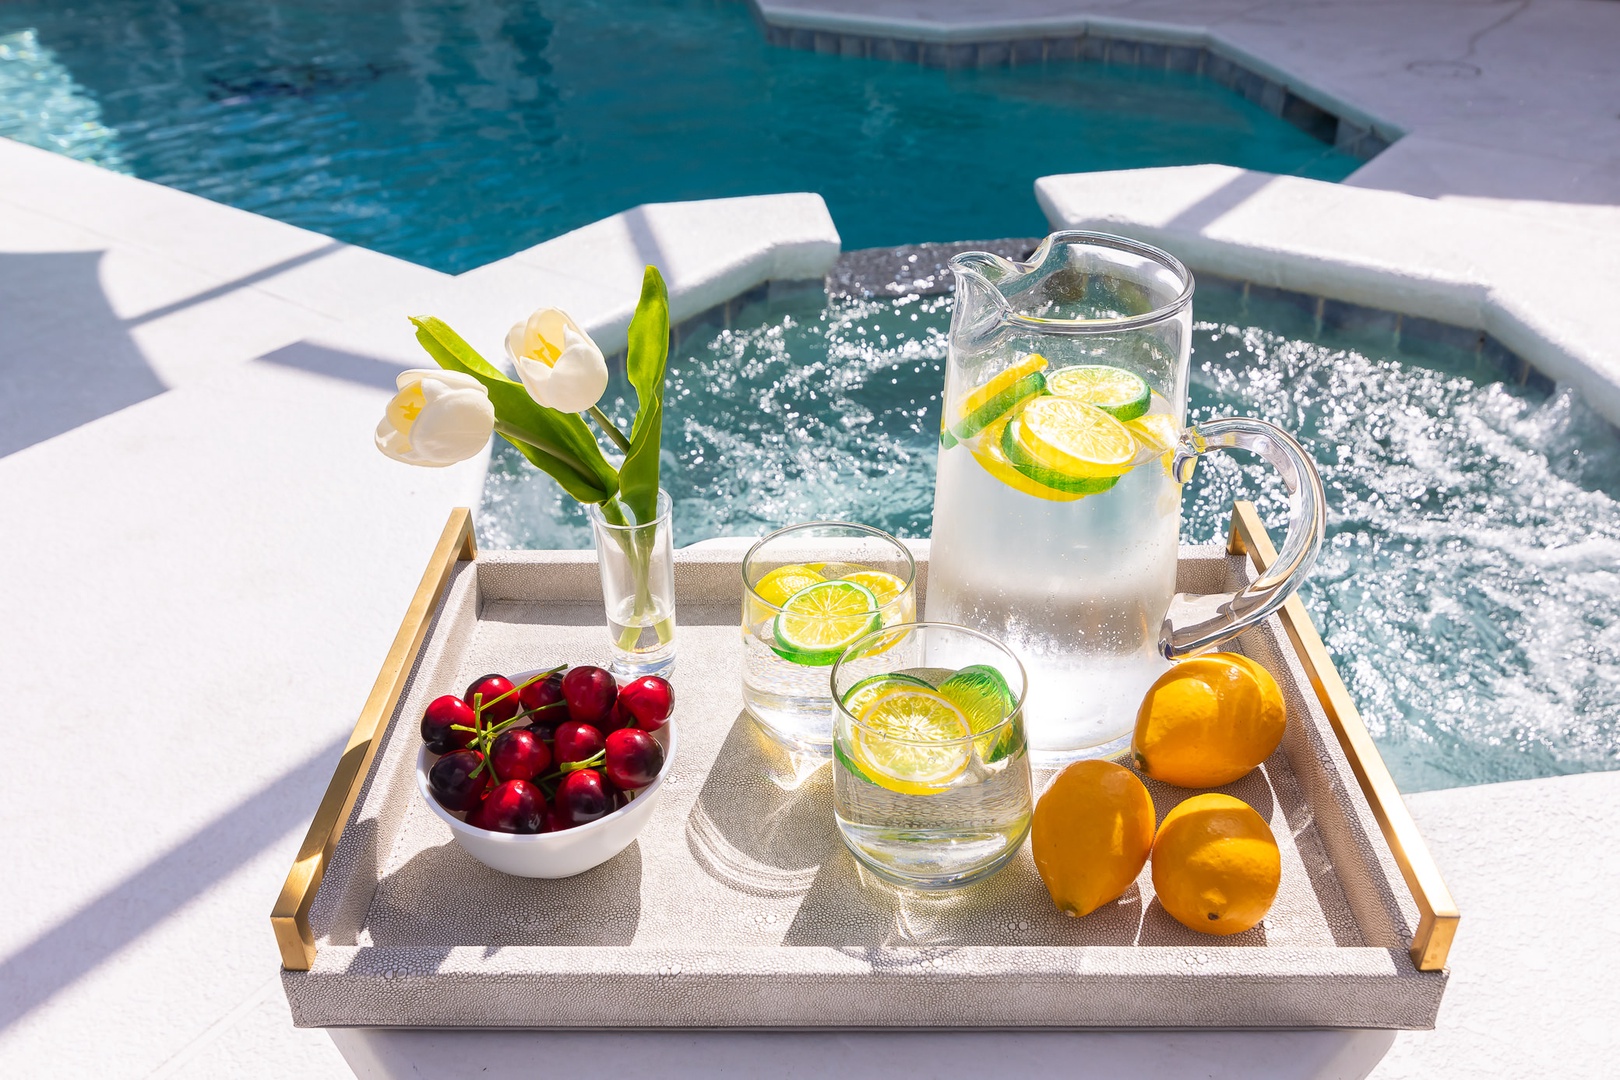 Take the poolside tray out with your favorite snacks to keep you energized through the fun